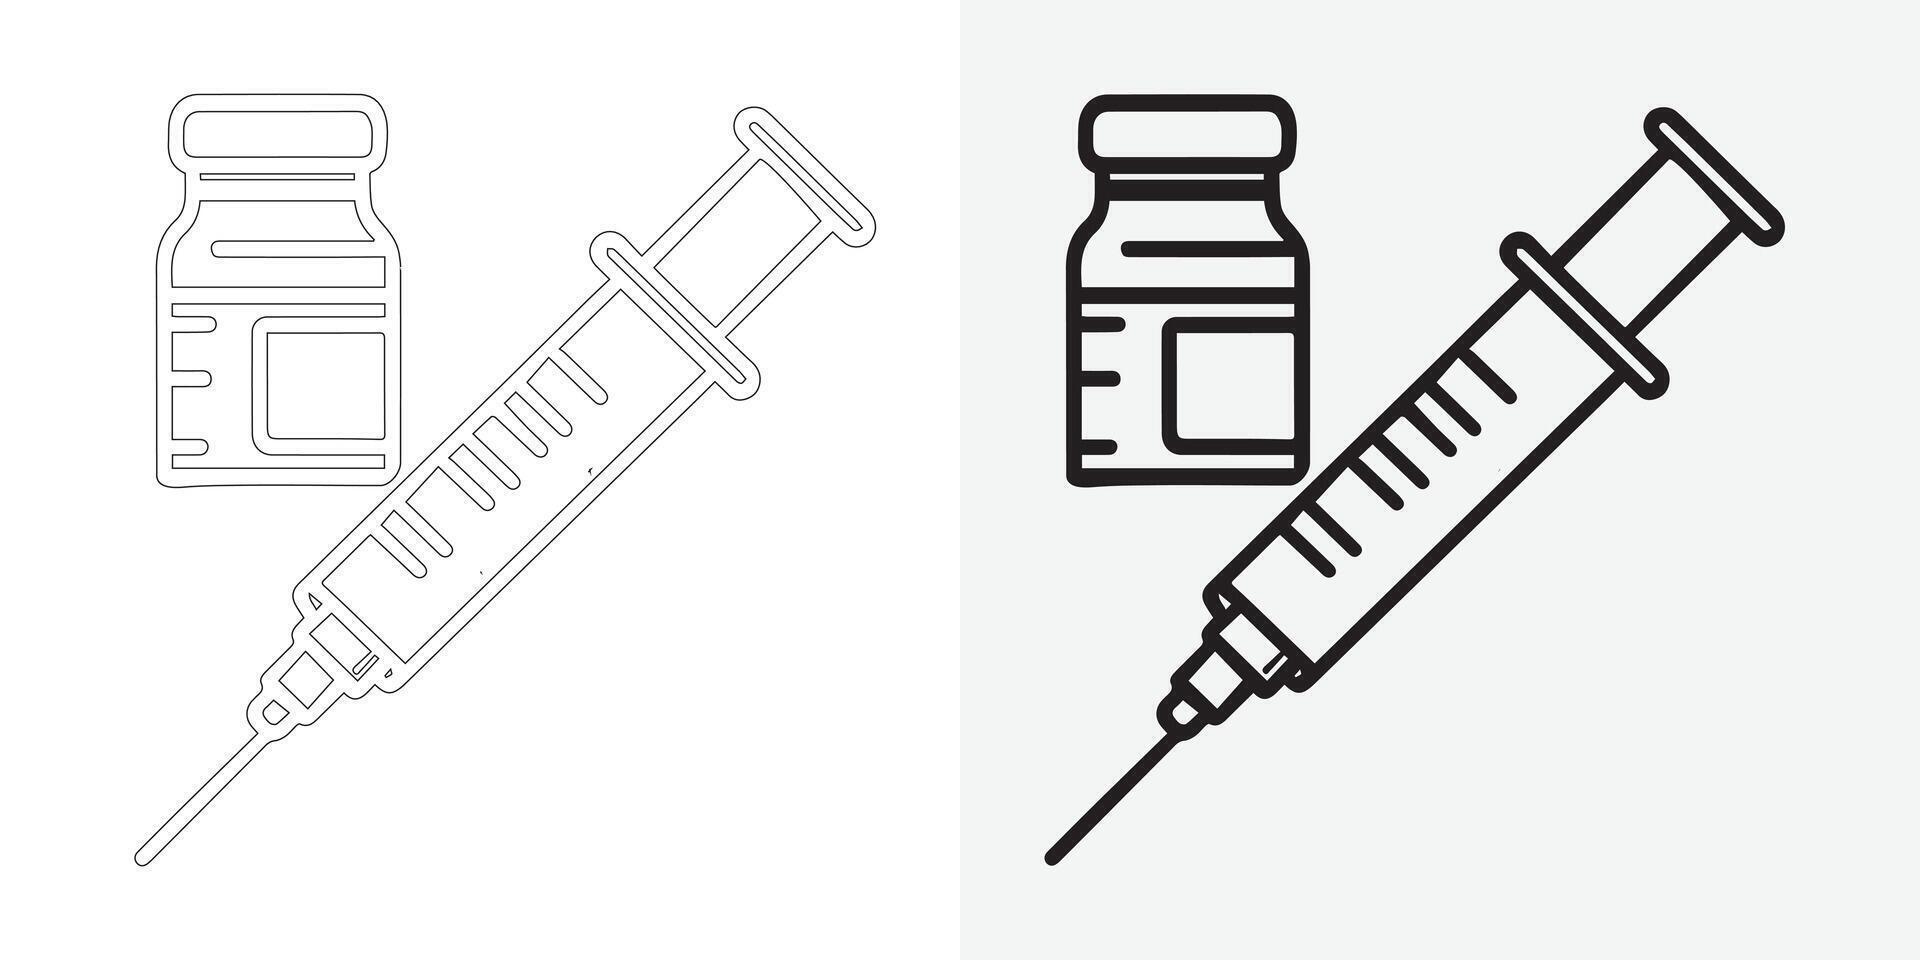 icon for vaccinations. syringe with a container. common ways to avoid colds. vaccination dose. prescription drugs and drugstores. vector